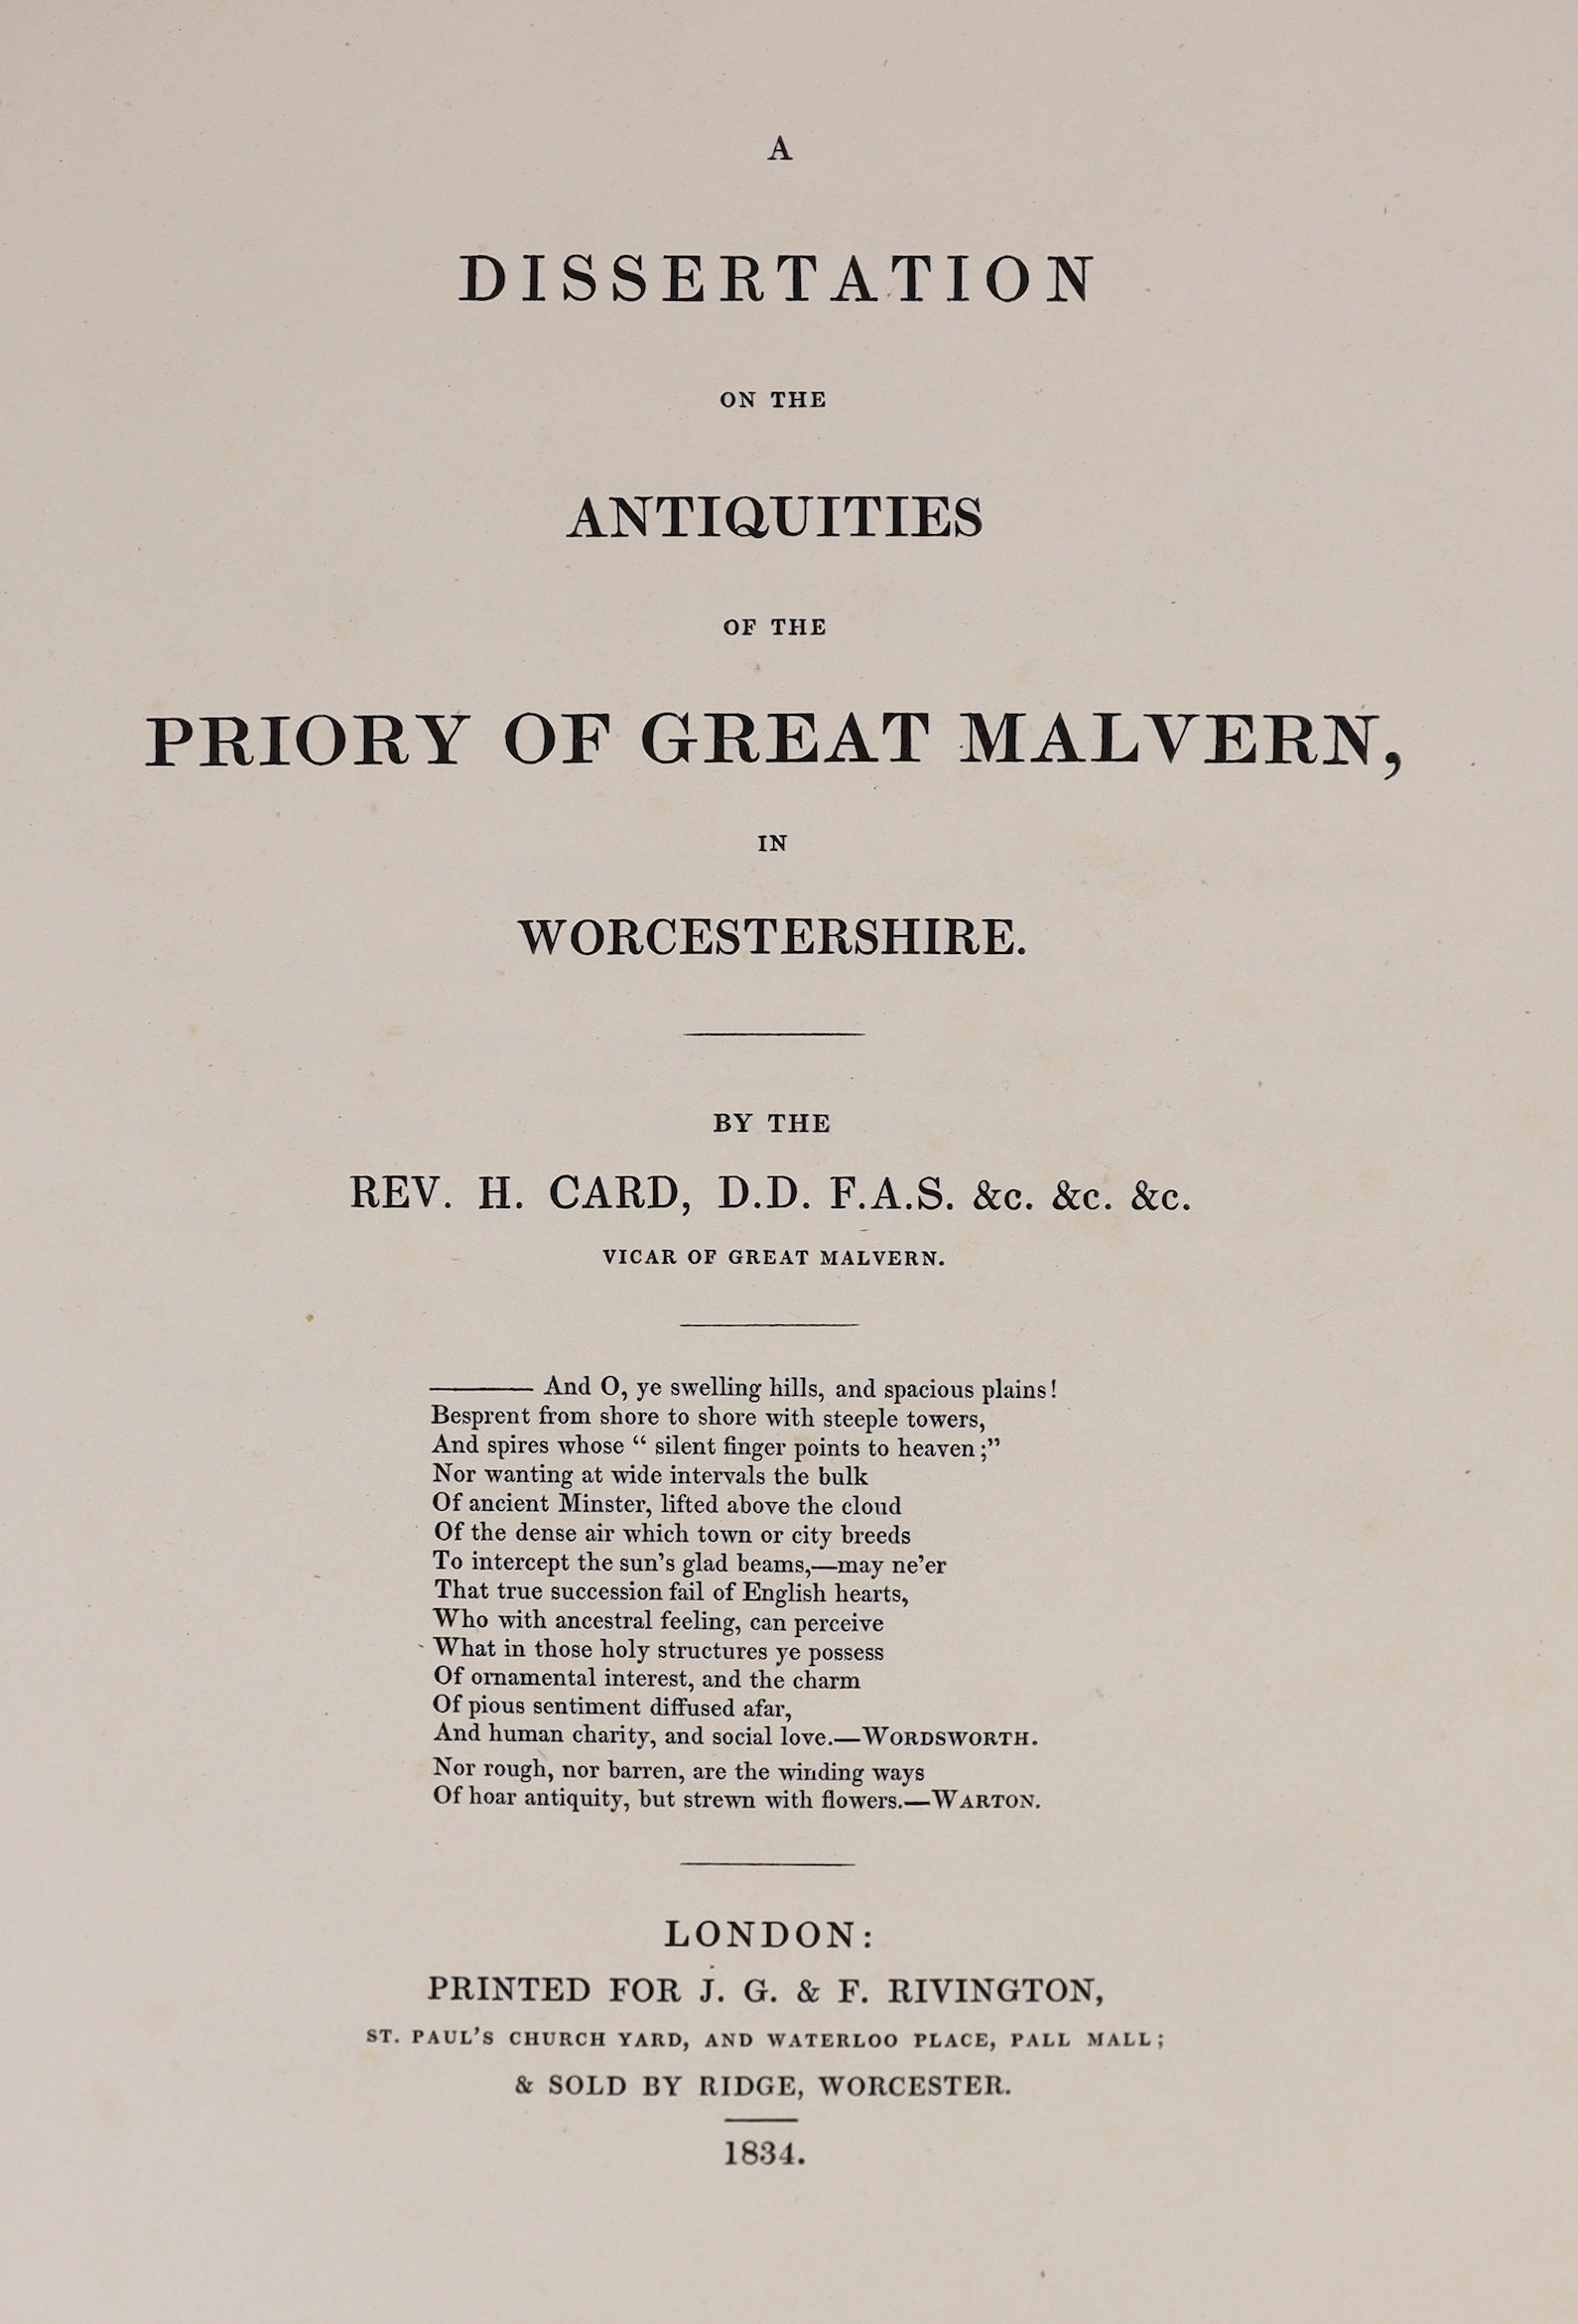 WORCS: Card, Rev. Henry - A Dissertation of the Antiquities of the Priory of Great Malvern ... lithographed frontis and text engravings; pictorial printed boards (rebacked leather), 4to. 1834; Booker, Rev. Luke - A Descr